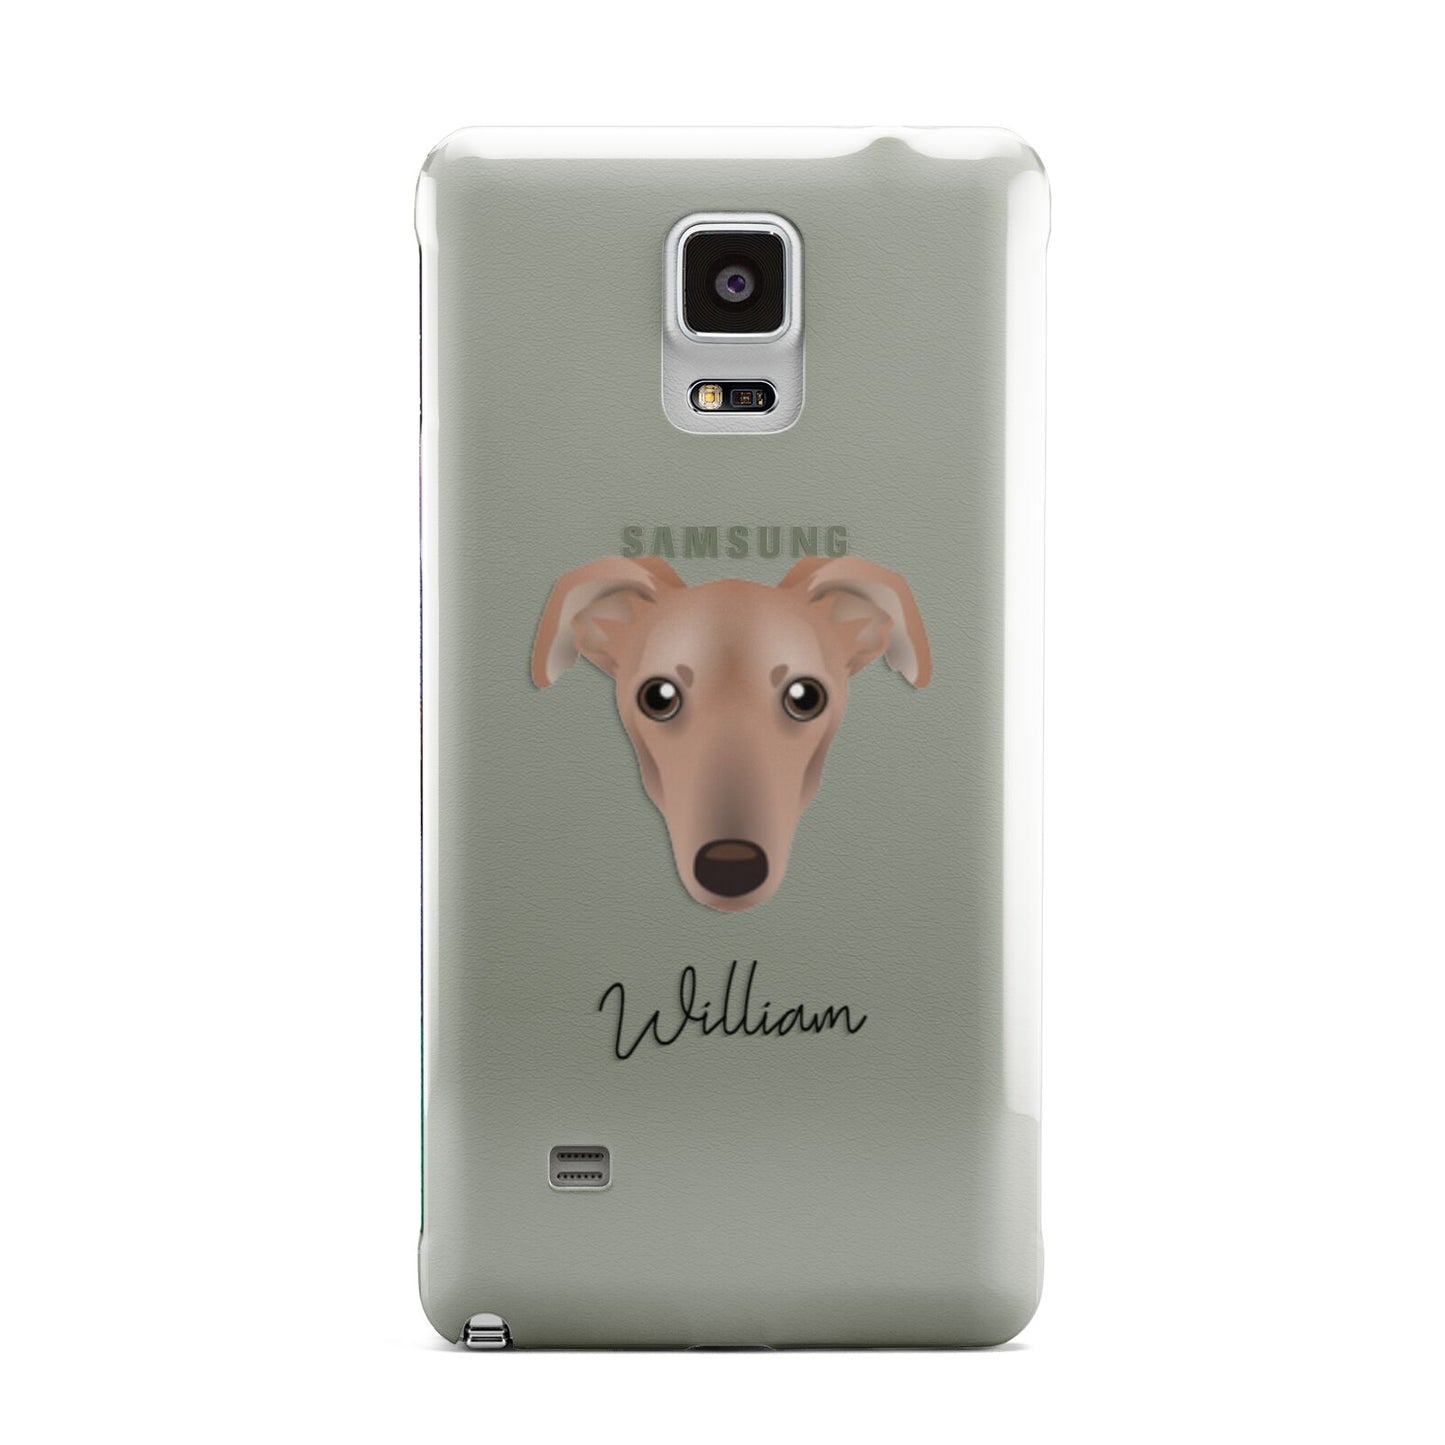 Lurcher Personalised Samsung Galaxy Note 4 Case